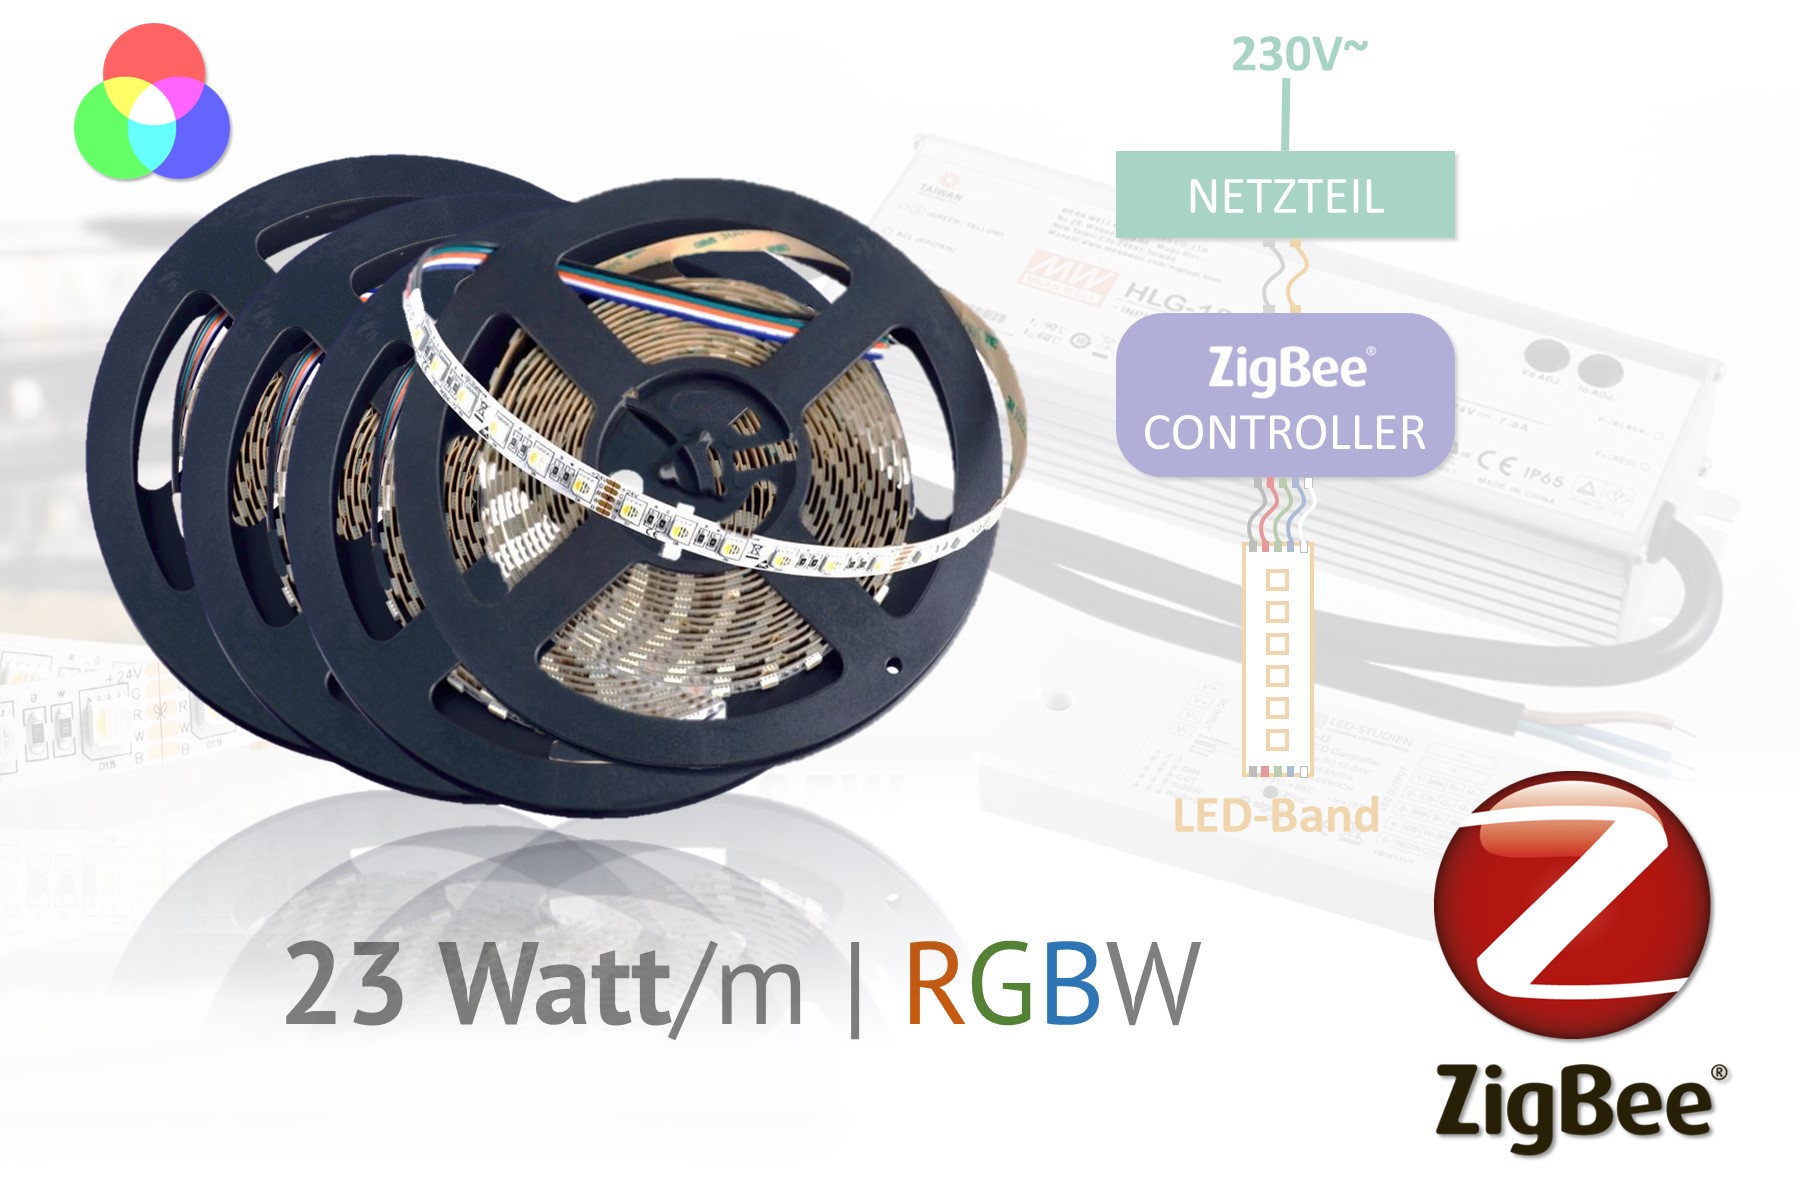 ZigBee LED set for accents - colour effects with RGBW LEDs